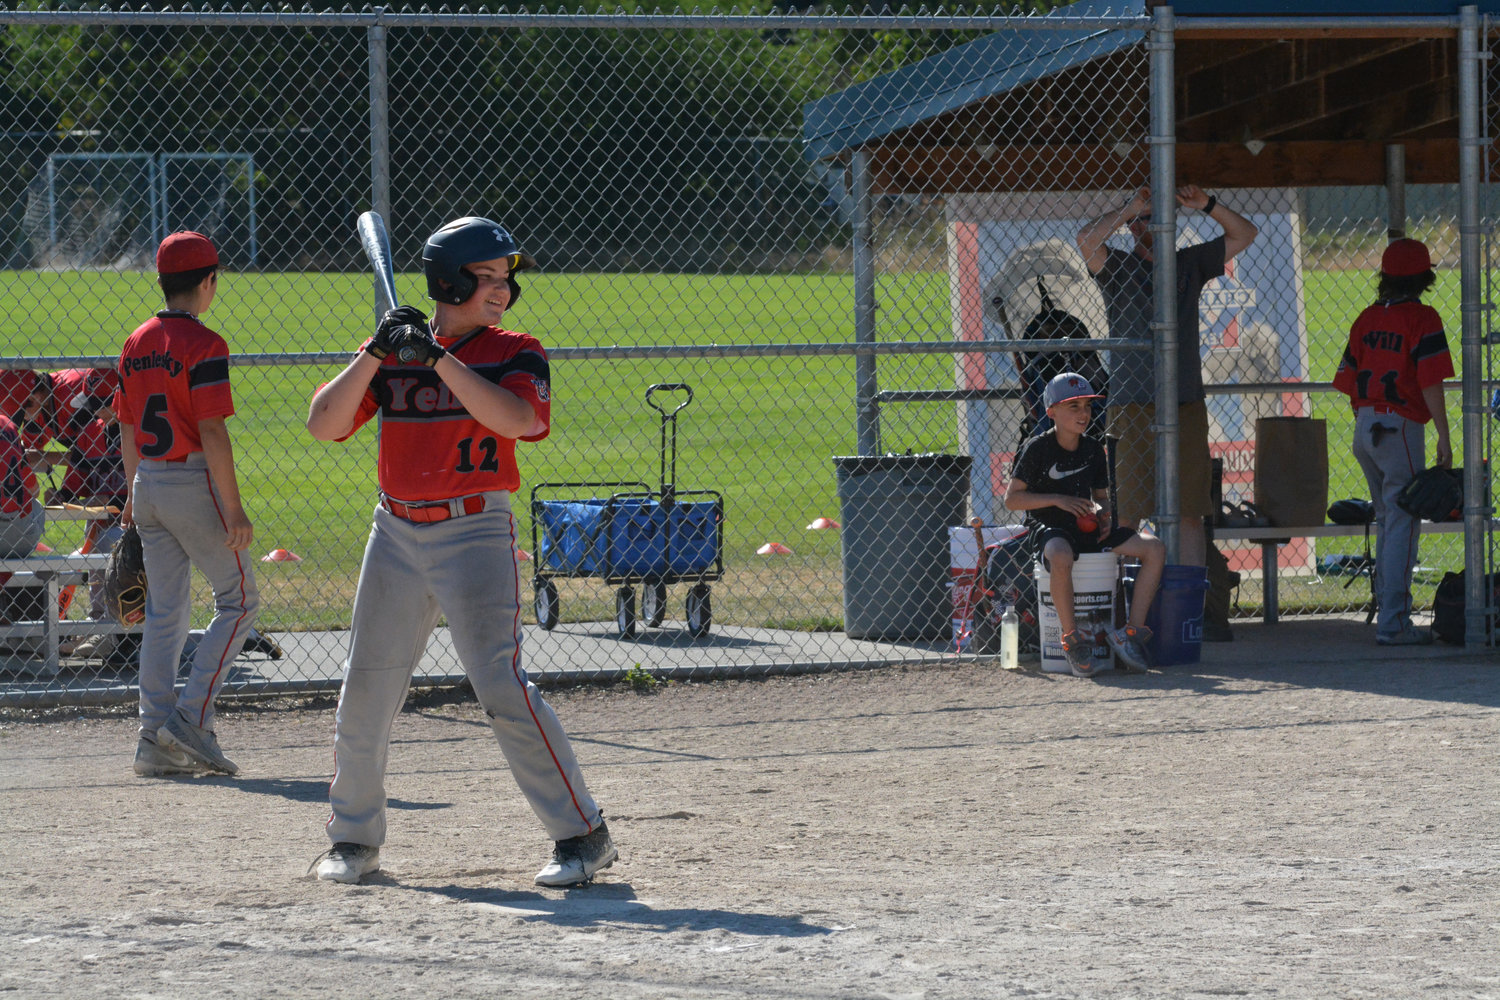 Nisqually Basin 12U All Star Finn Hanly smiles as he awaits the pitch in the batter's box.